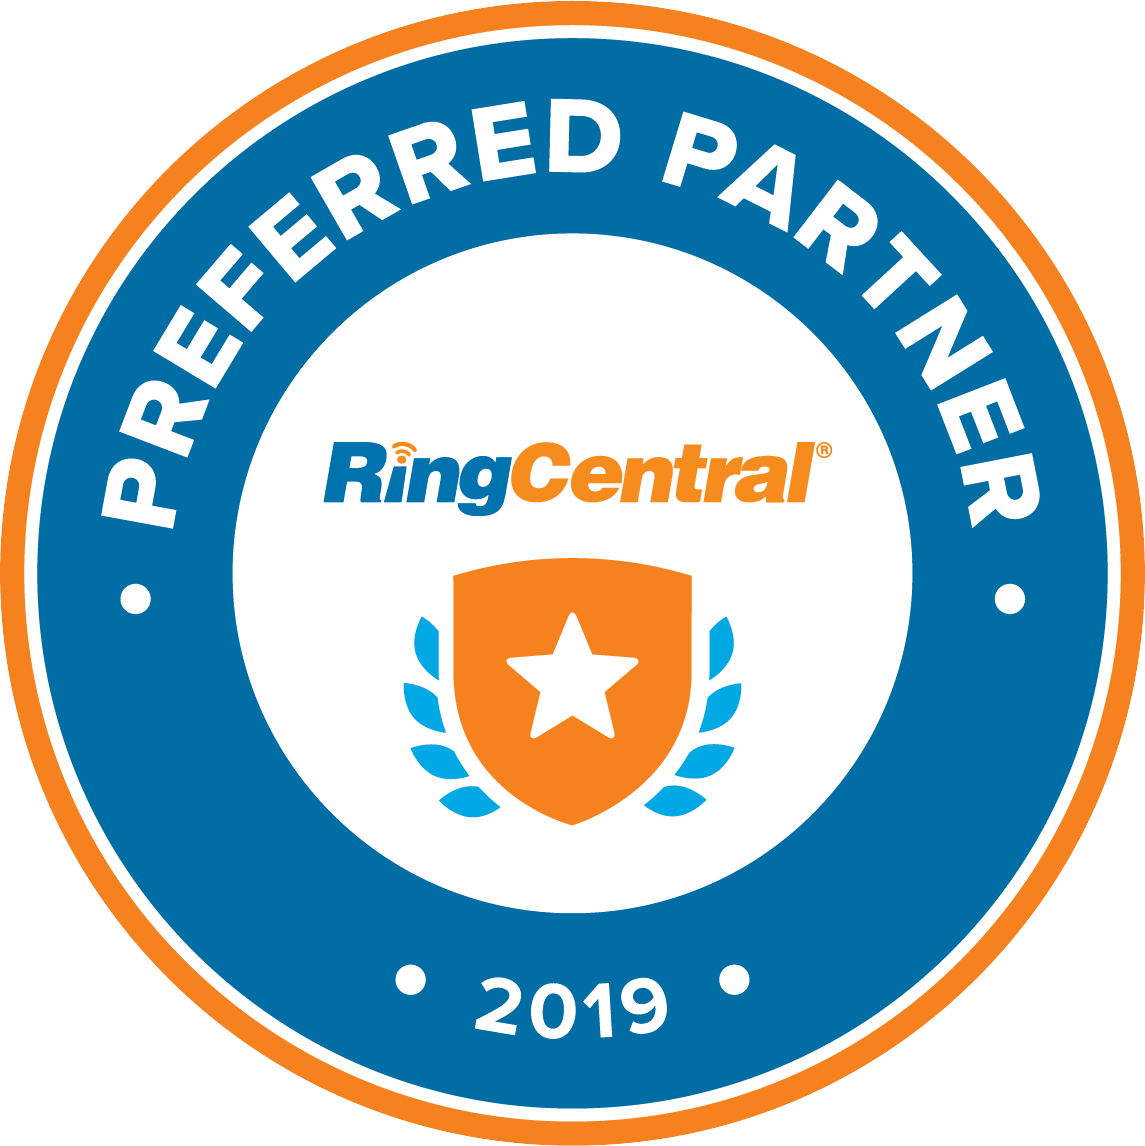 Converged Technology Professionals Achieves RingCentral’s Prestigious Preferred Partner Status